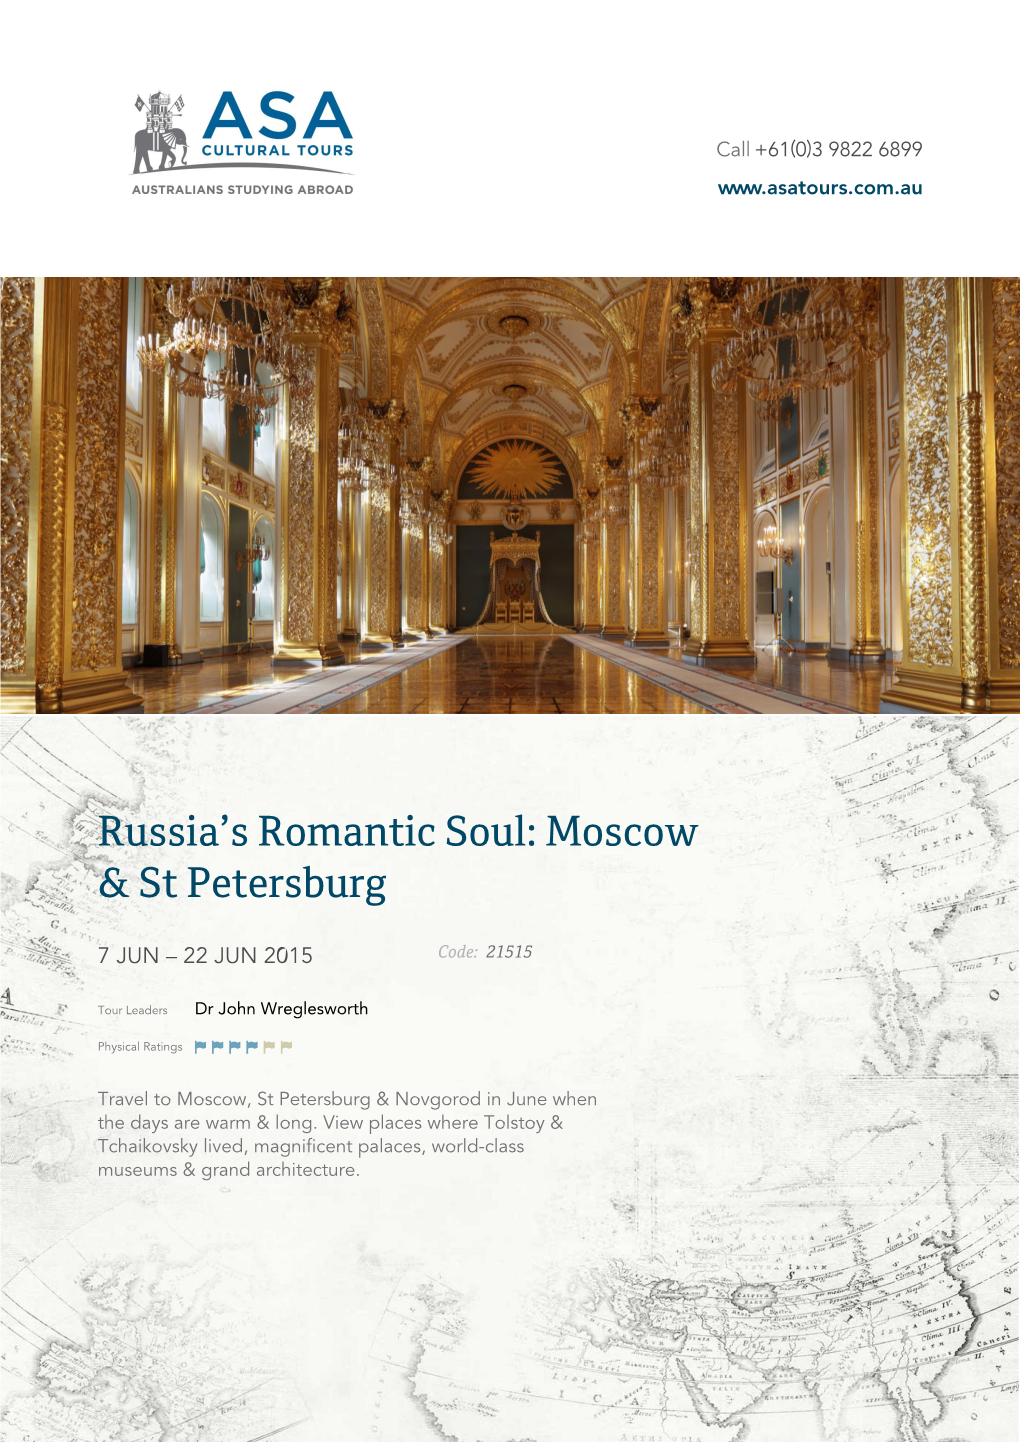 Russia's Romantic Soul: Moscow & St Petersburg